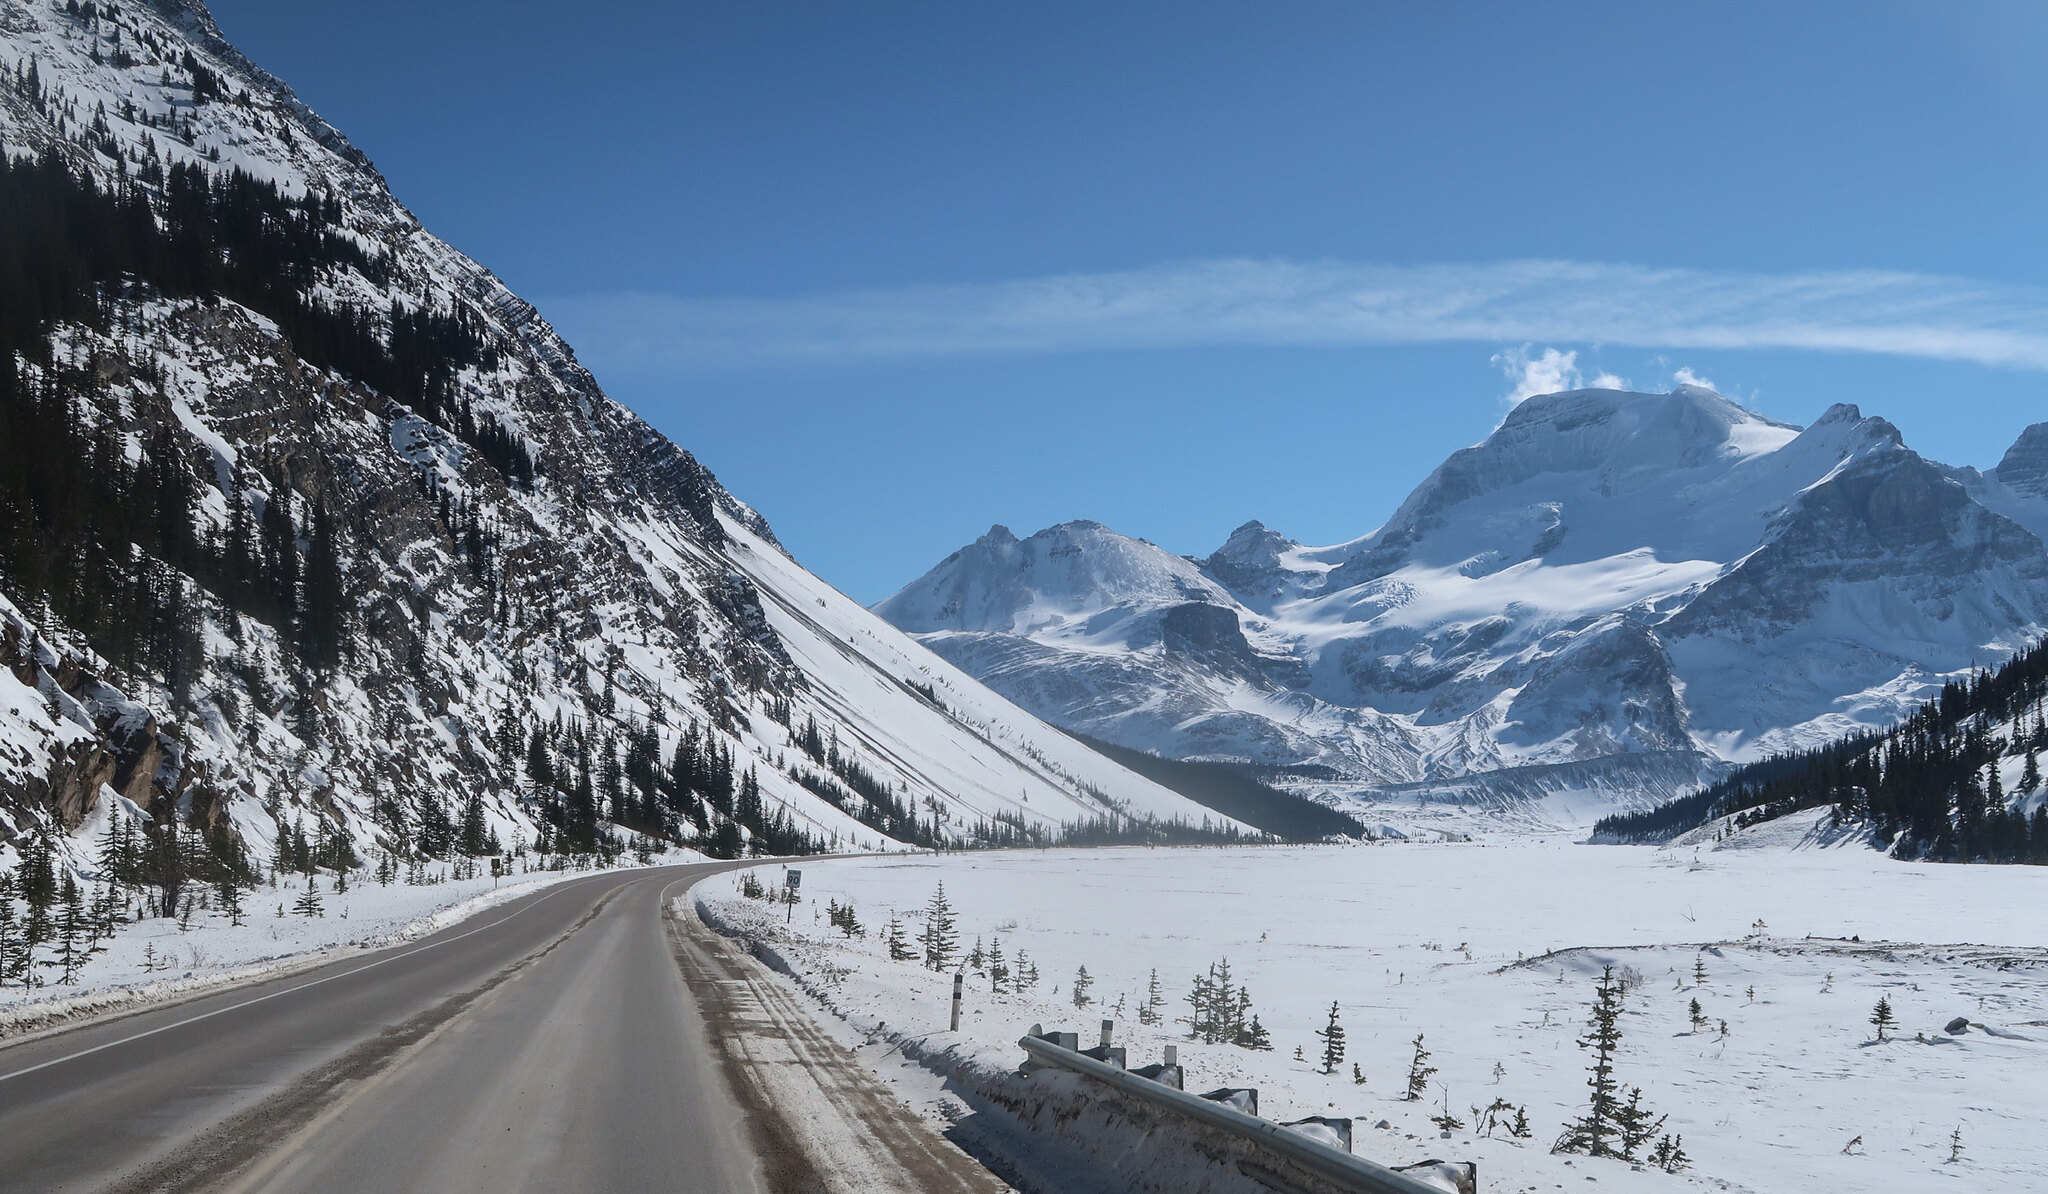 Cycling the Icefield Parkway in winter